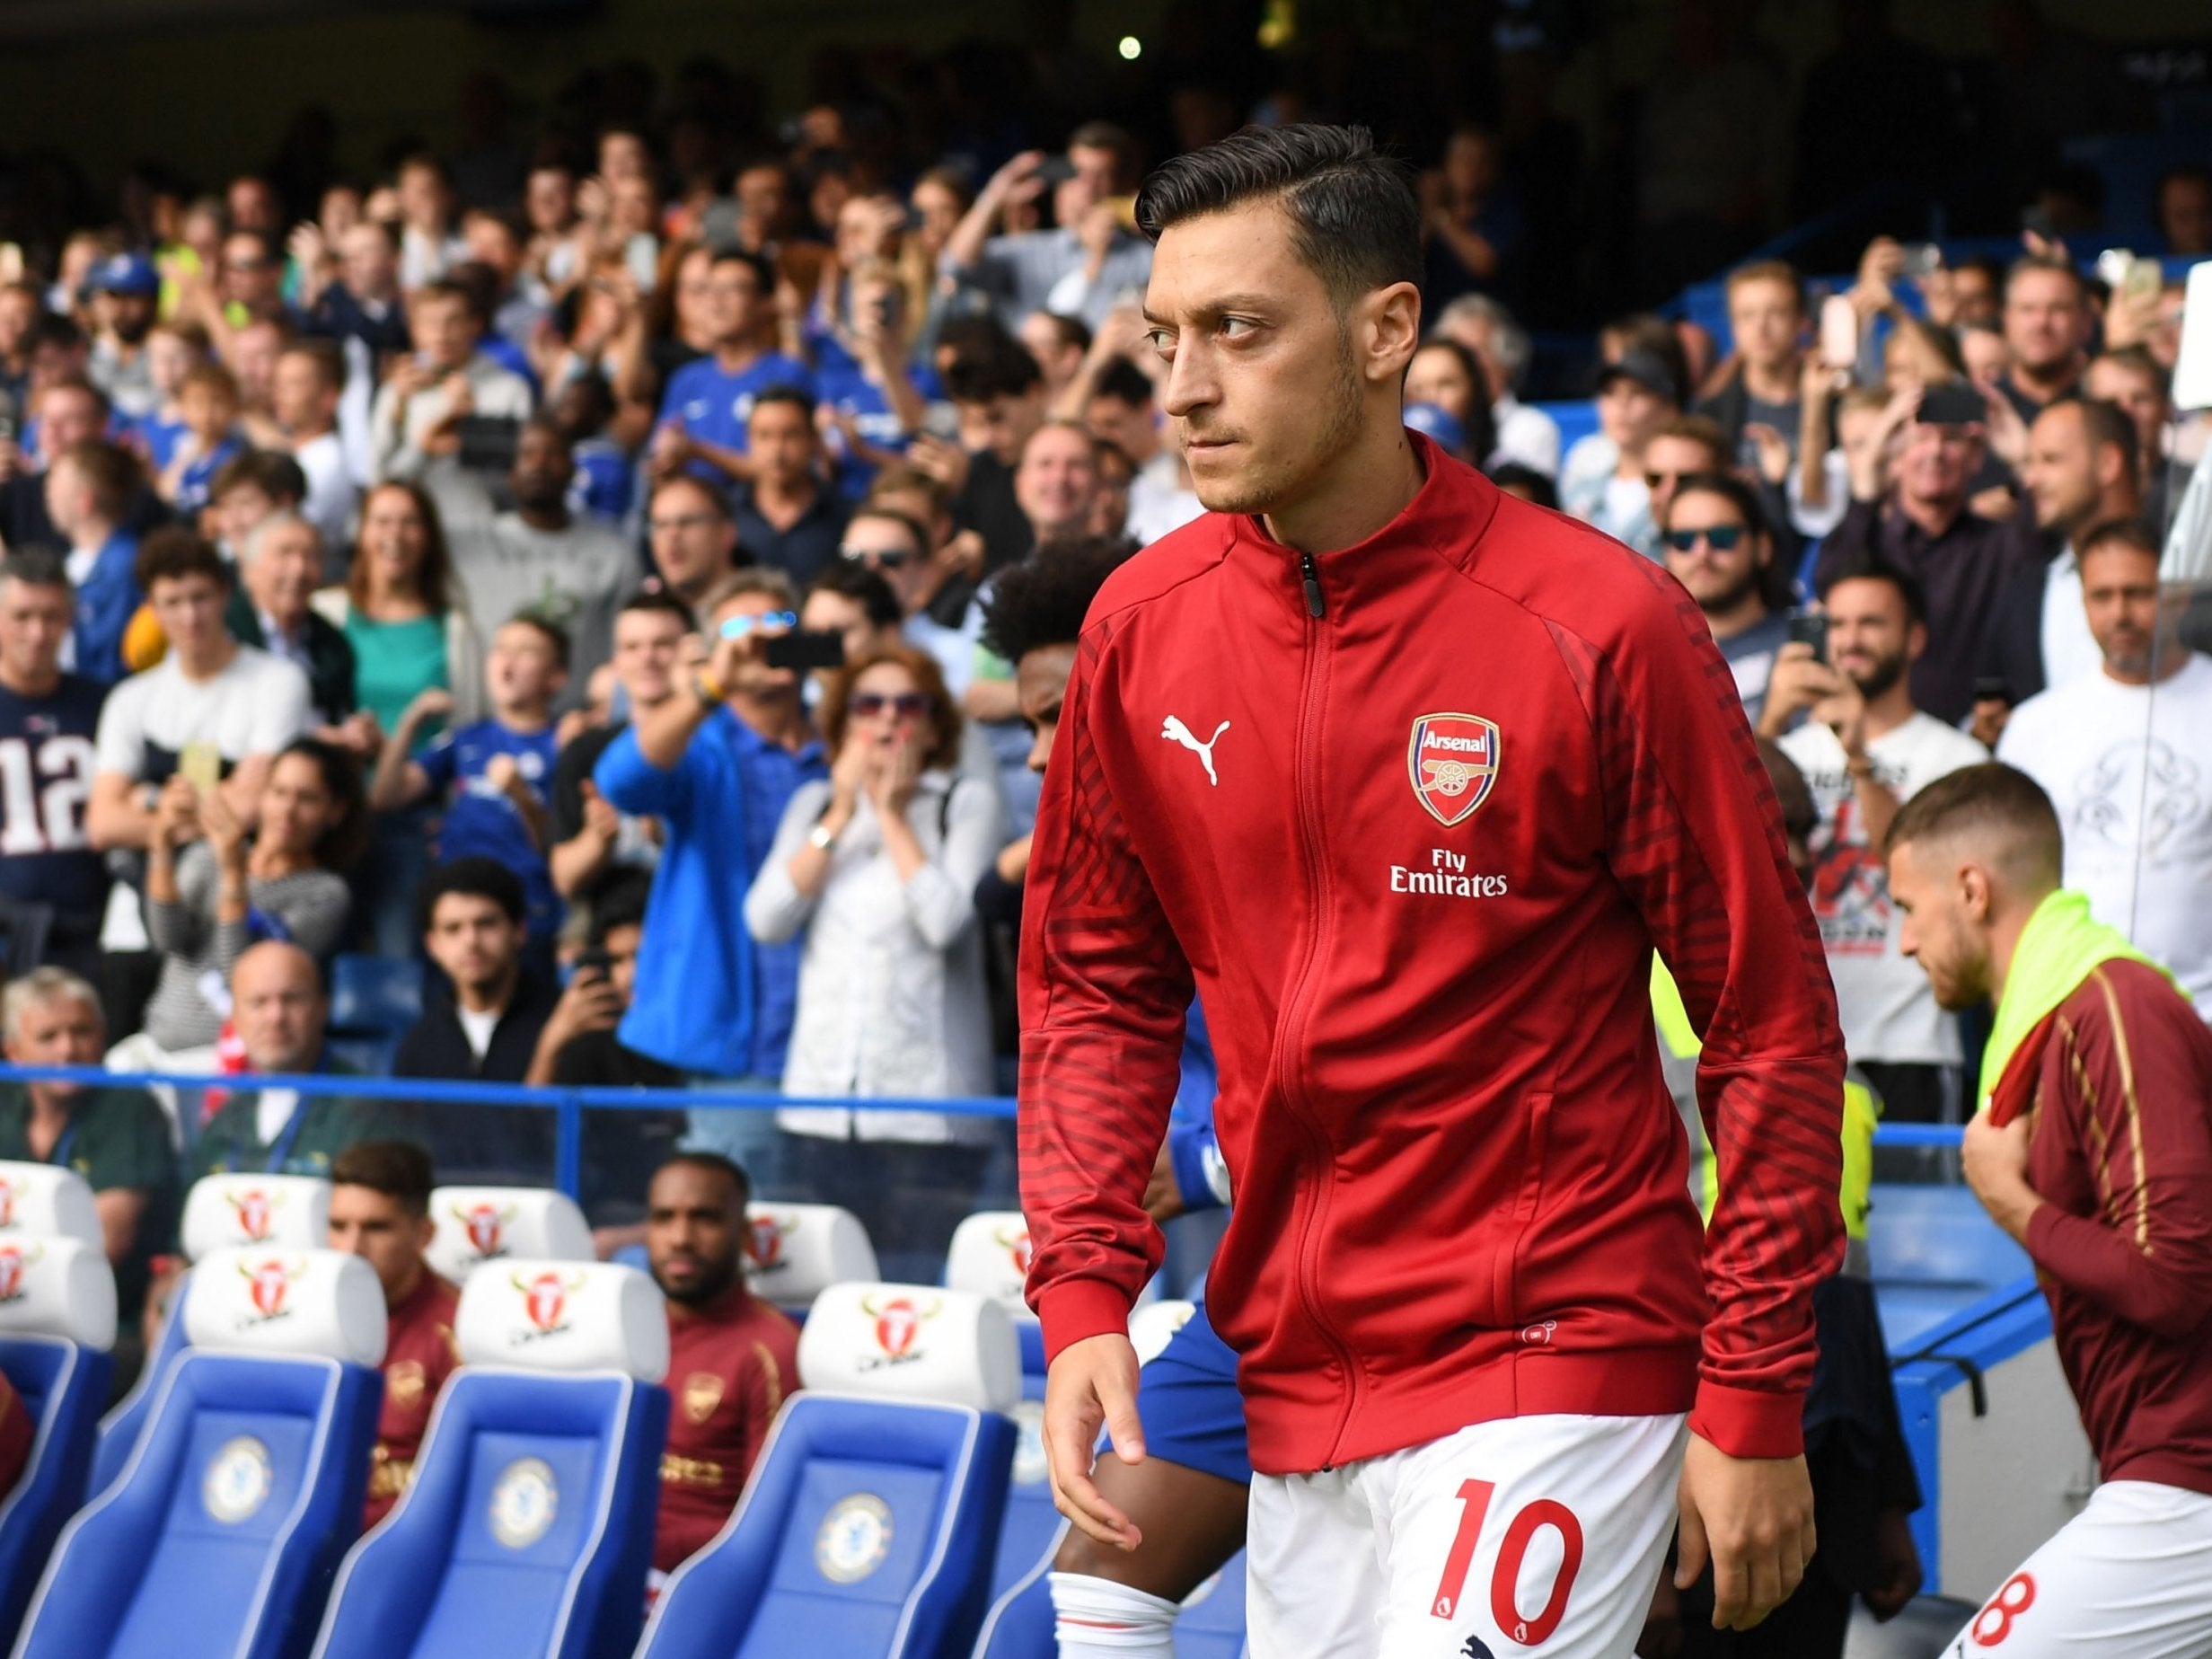 Mesut Özil could return from illness for Arsenal's trip to Cardiff